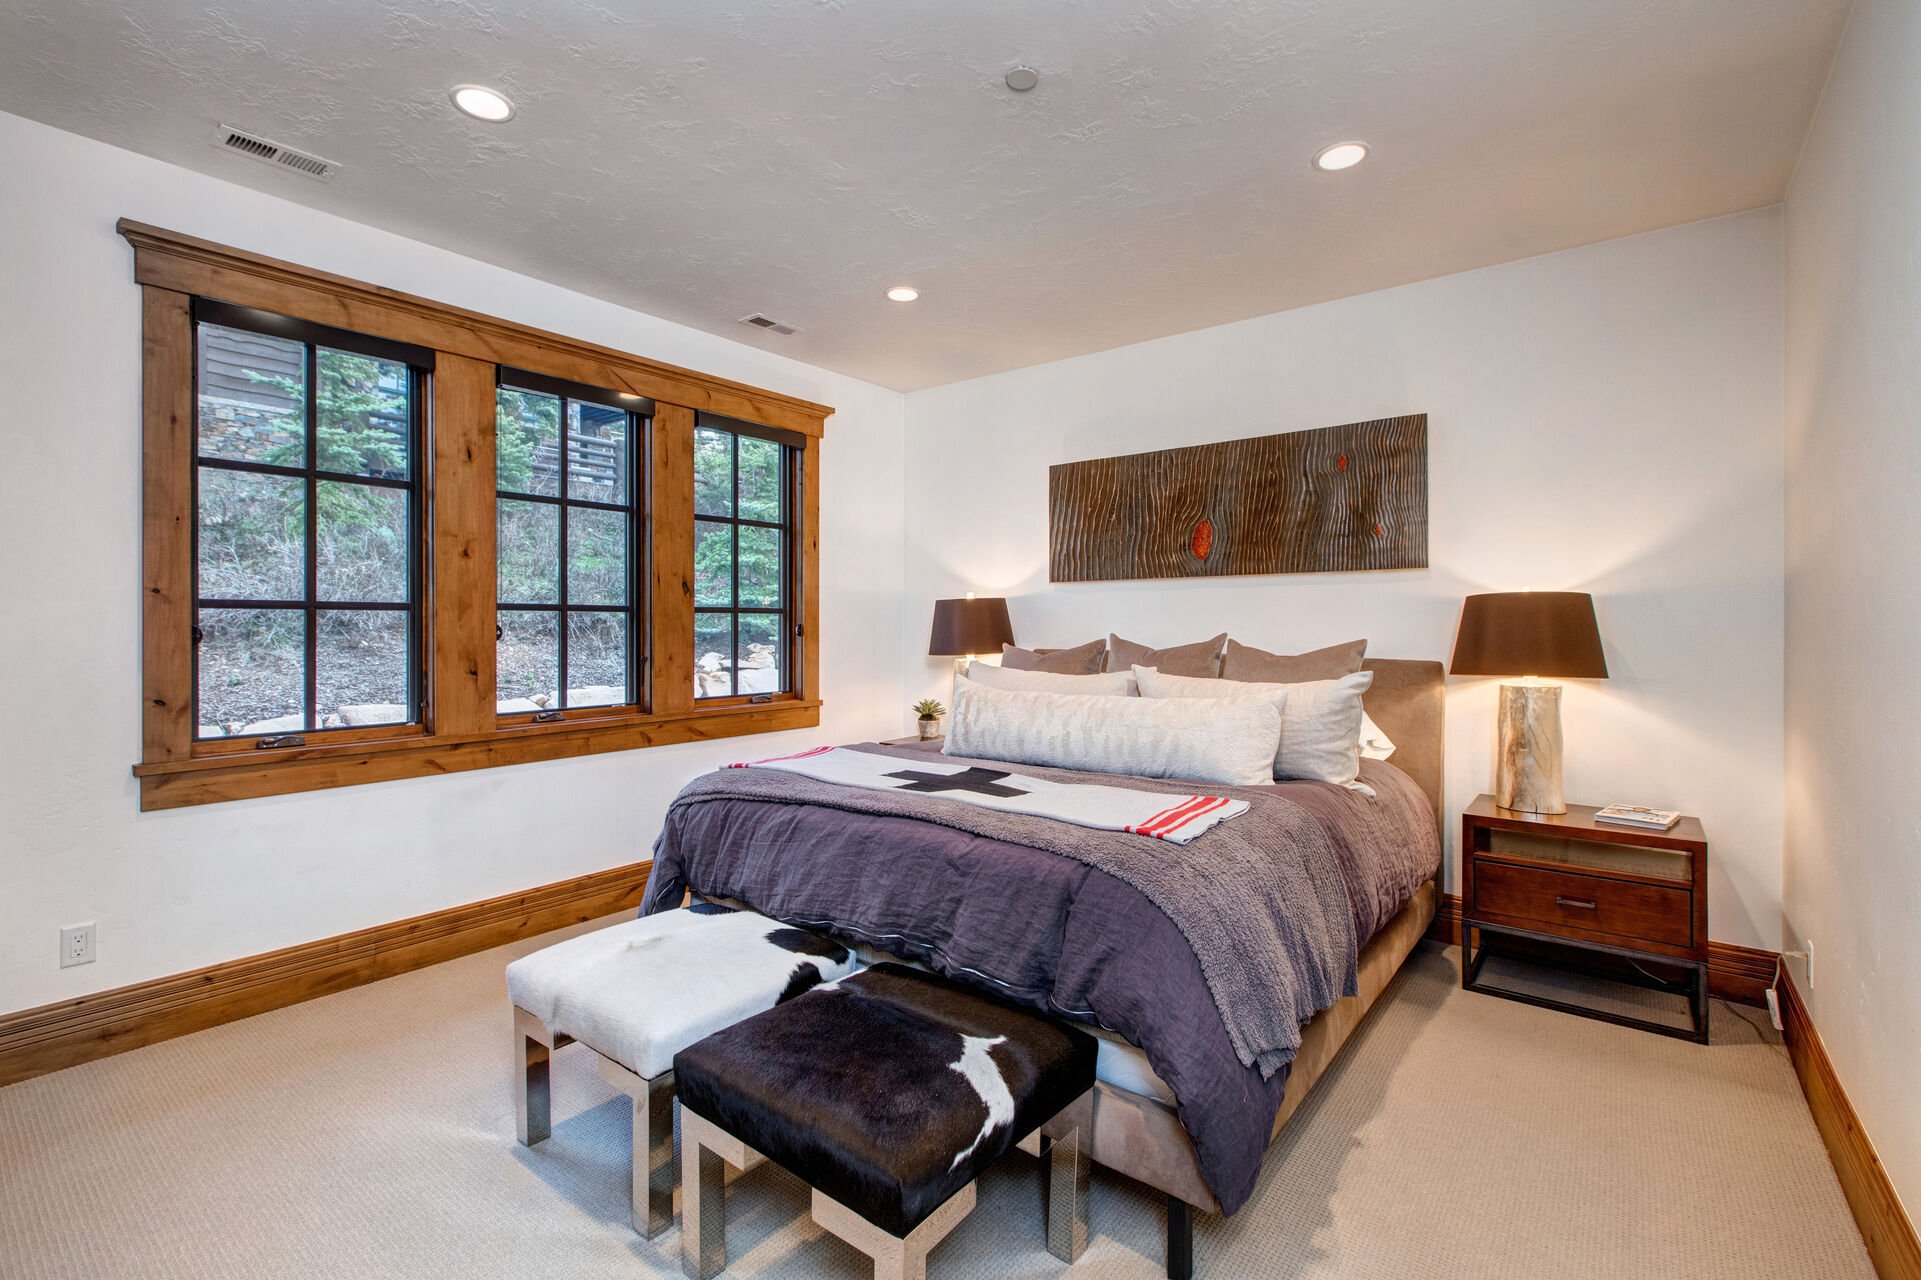 Upper Level Bedroom 3 with king bed, hot tub patio access, and en suite bathroom